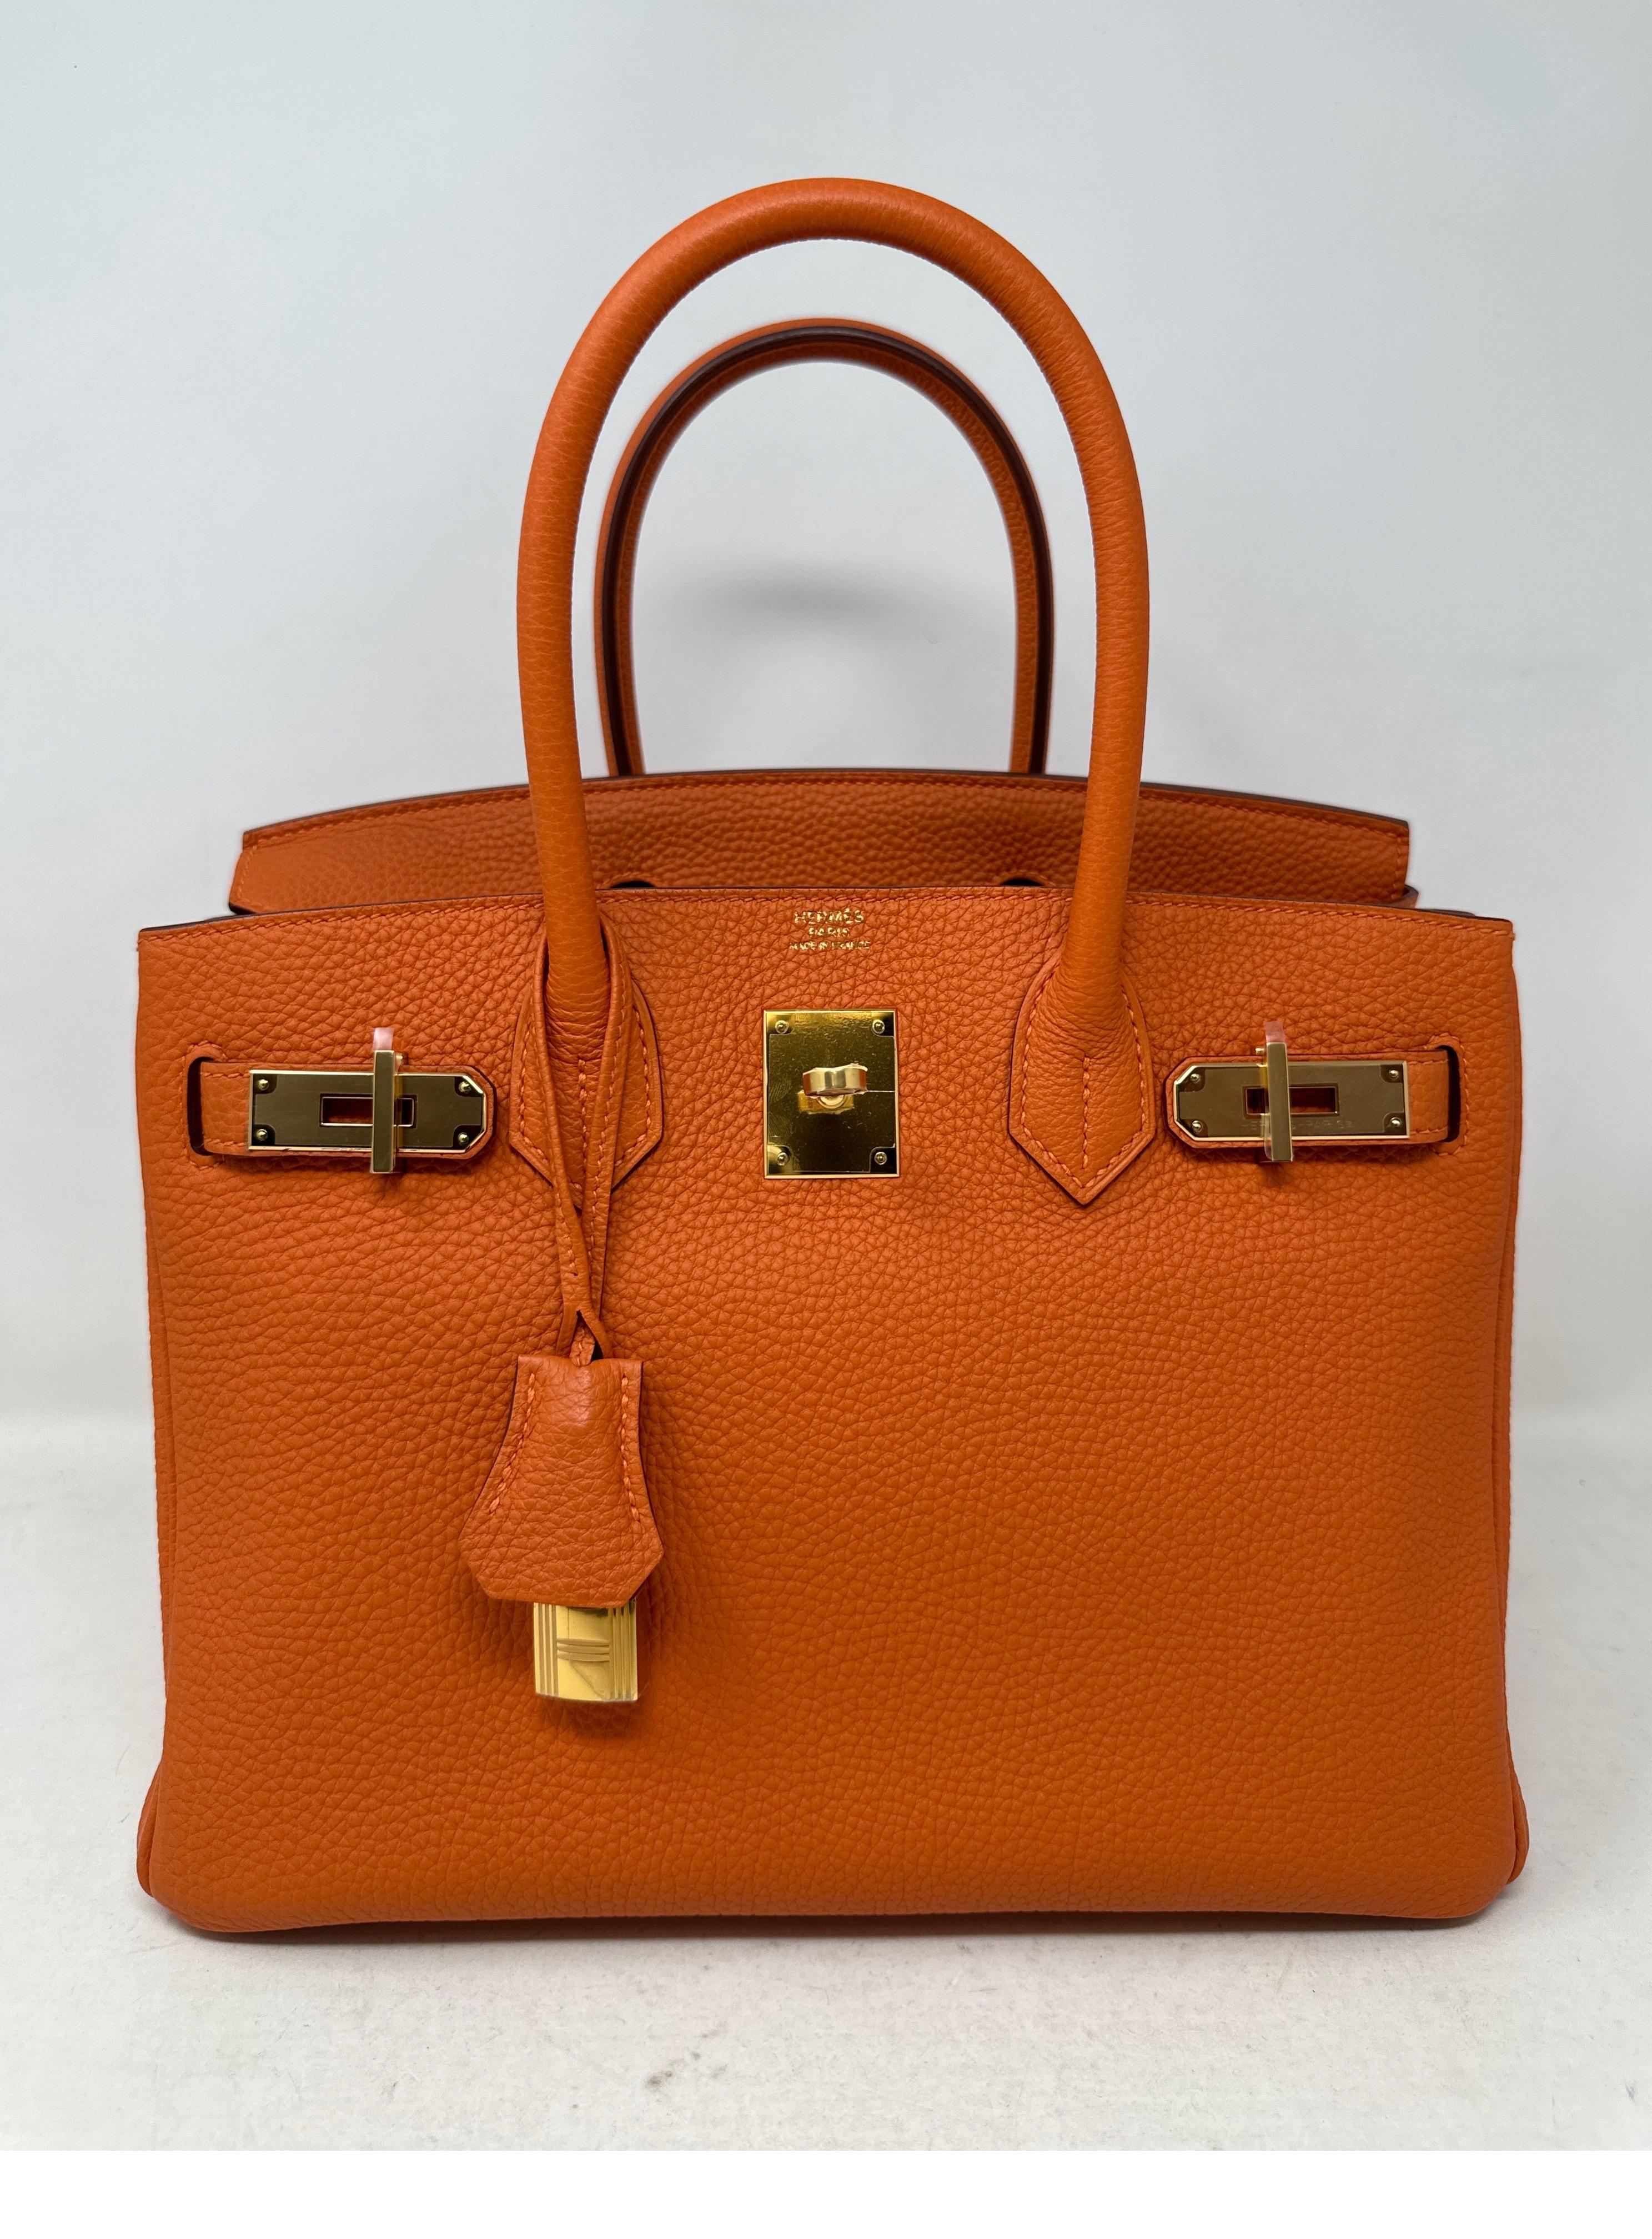 Hermes Orange Birkin 30 Bag. Most classic orange Hermes color. This bag looks like it was never used. Excellent condition. Gold hardware. Togo leather. Stunning combination. Perfect gift to an Hermes  collector. Includes clochette, lock, keys, and